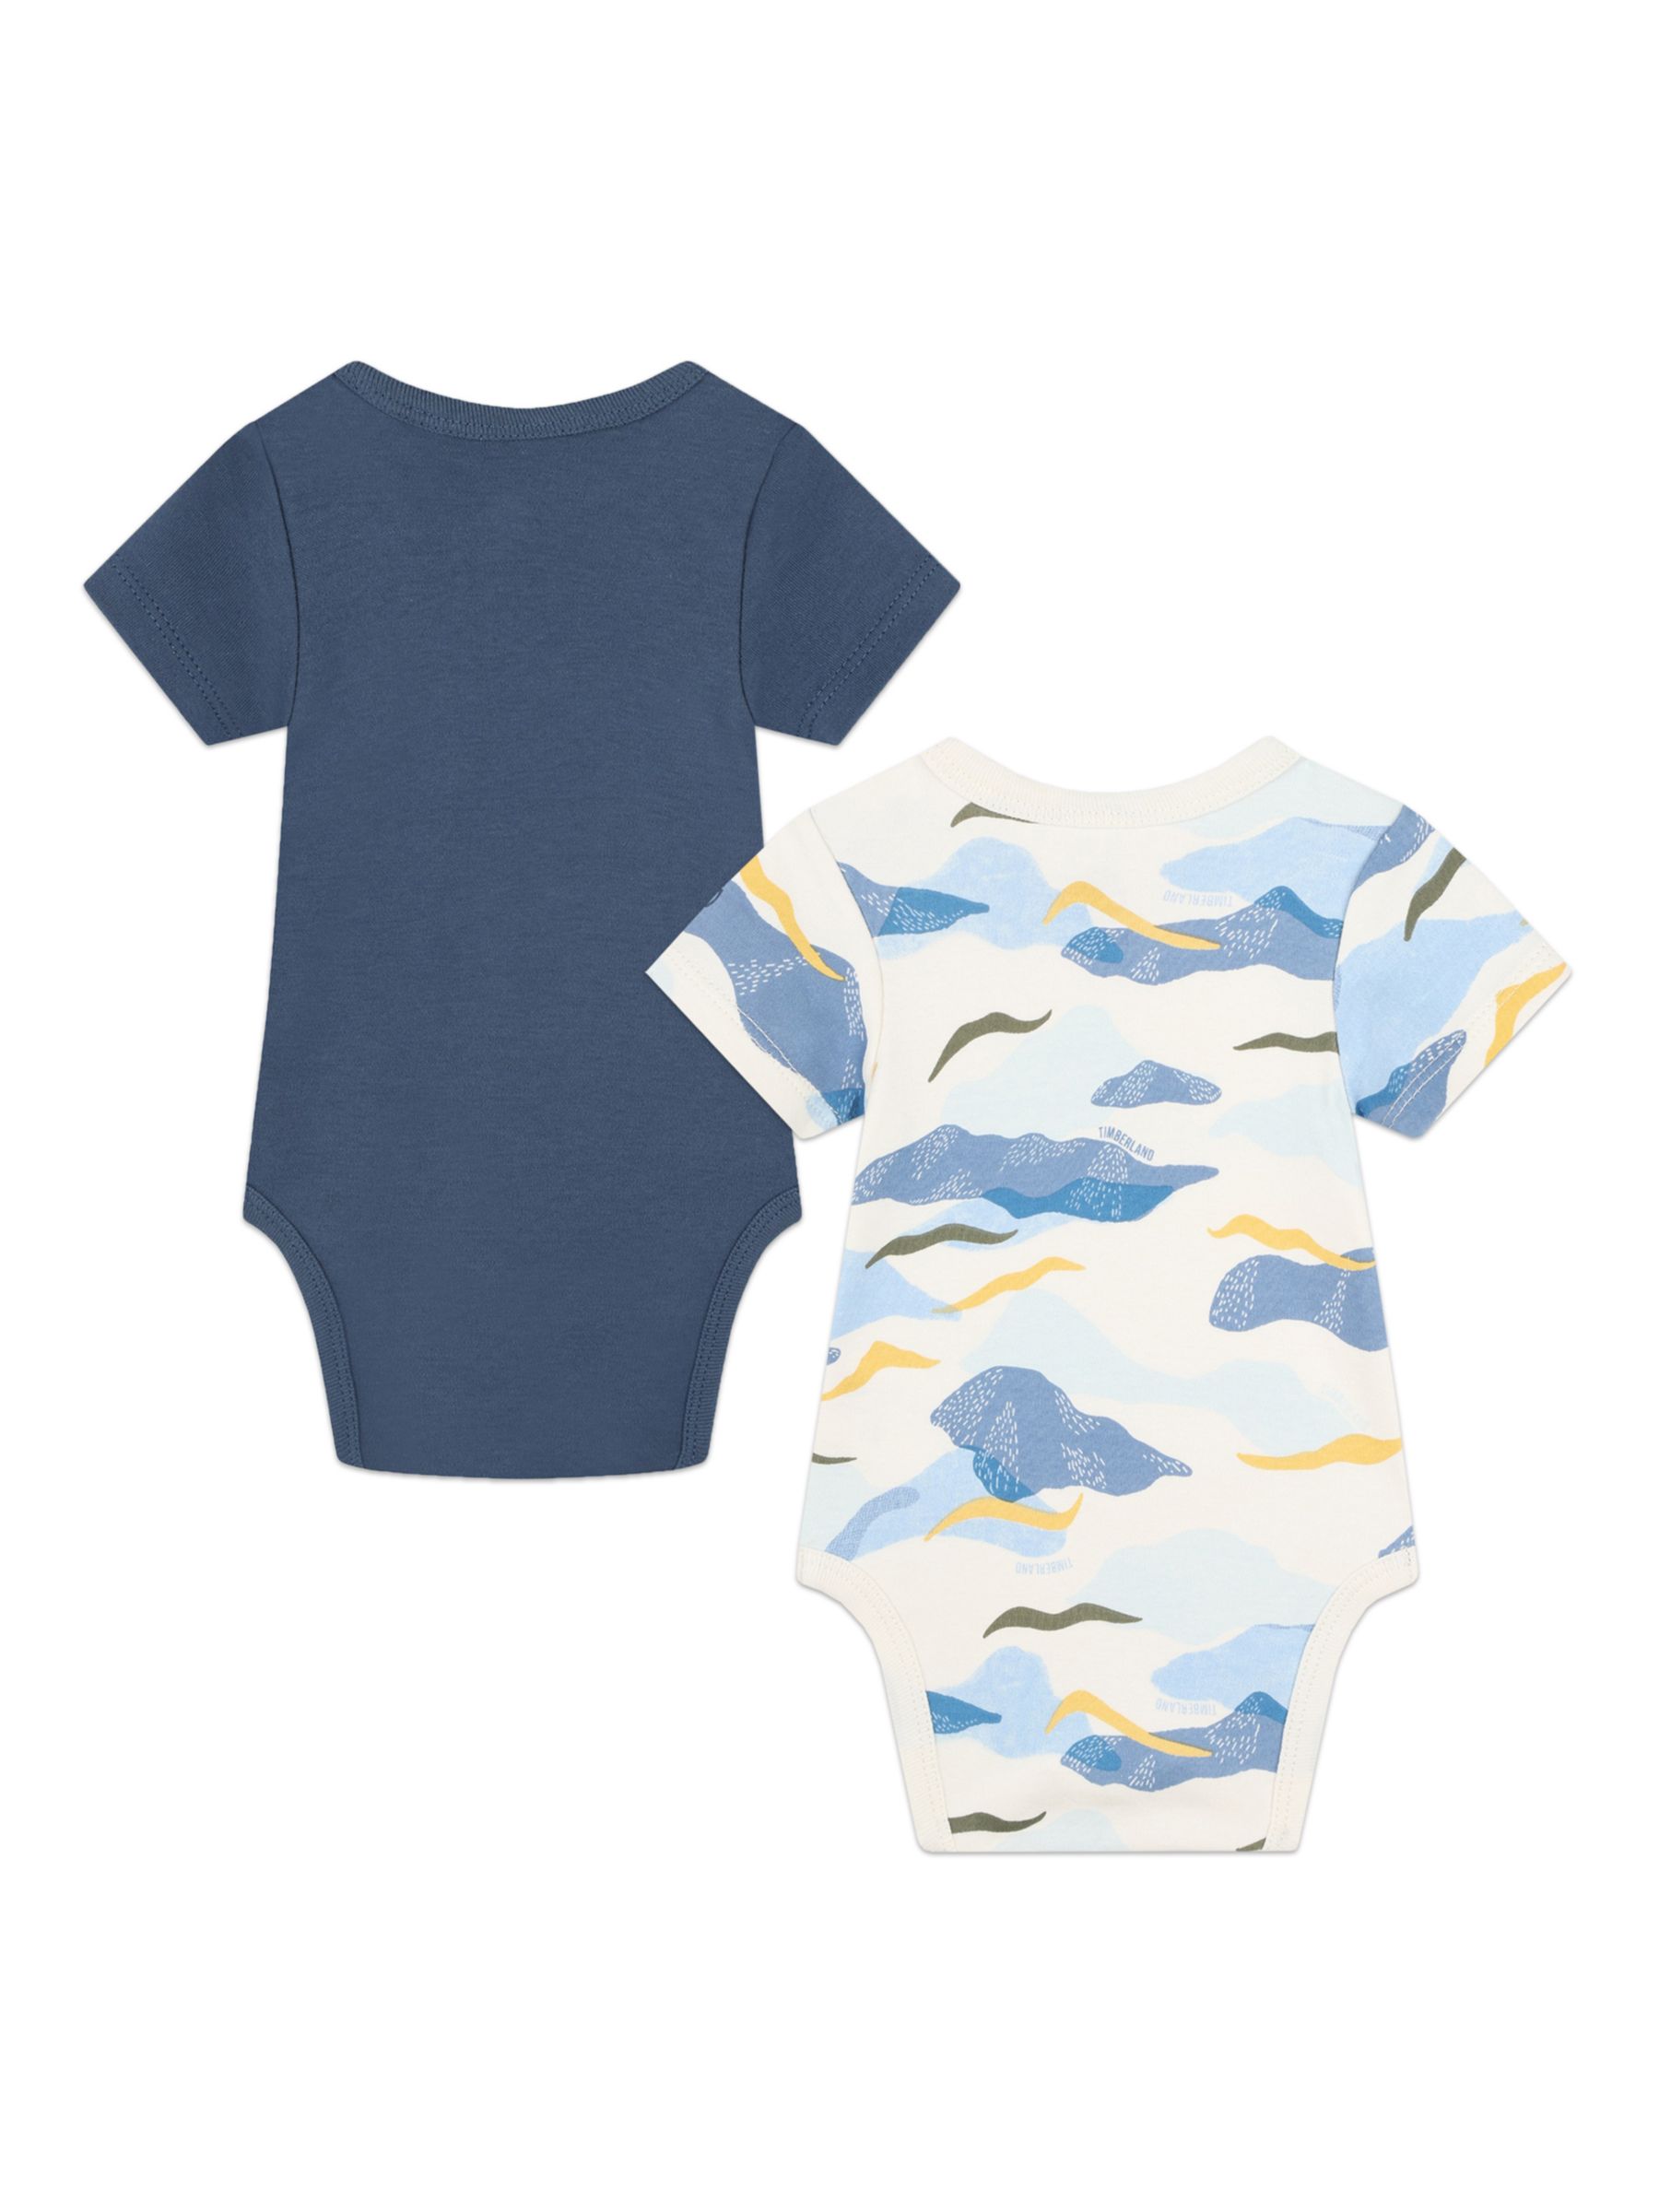 Timberland Baby Logo & Abstract Print Bodysuits, Pack Of 2, Blue/Multi, 3 months